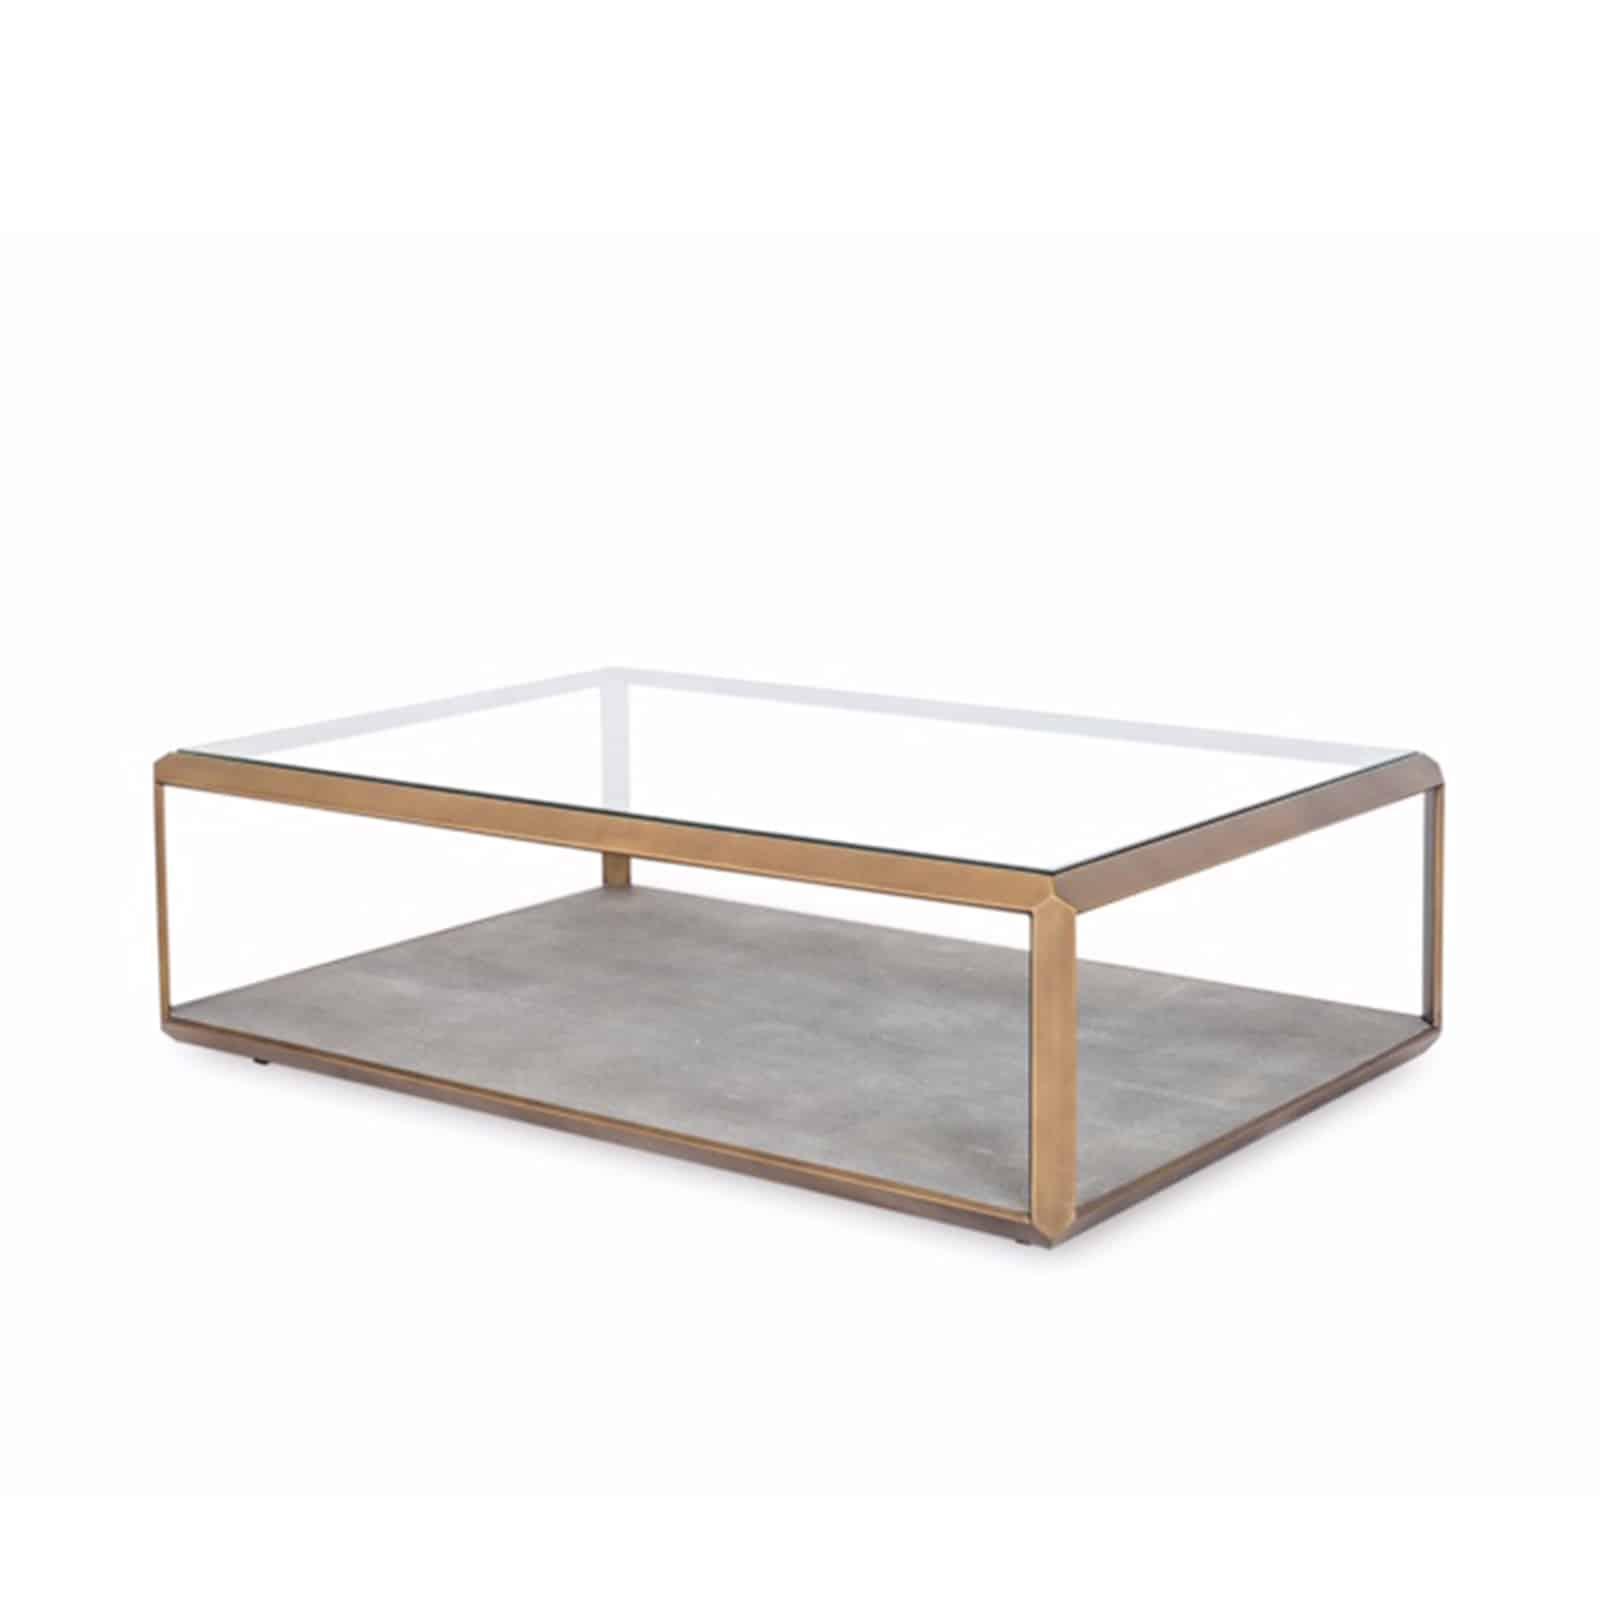 Elmley Coffee Table by DI Designs - Maison Rêves UK